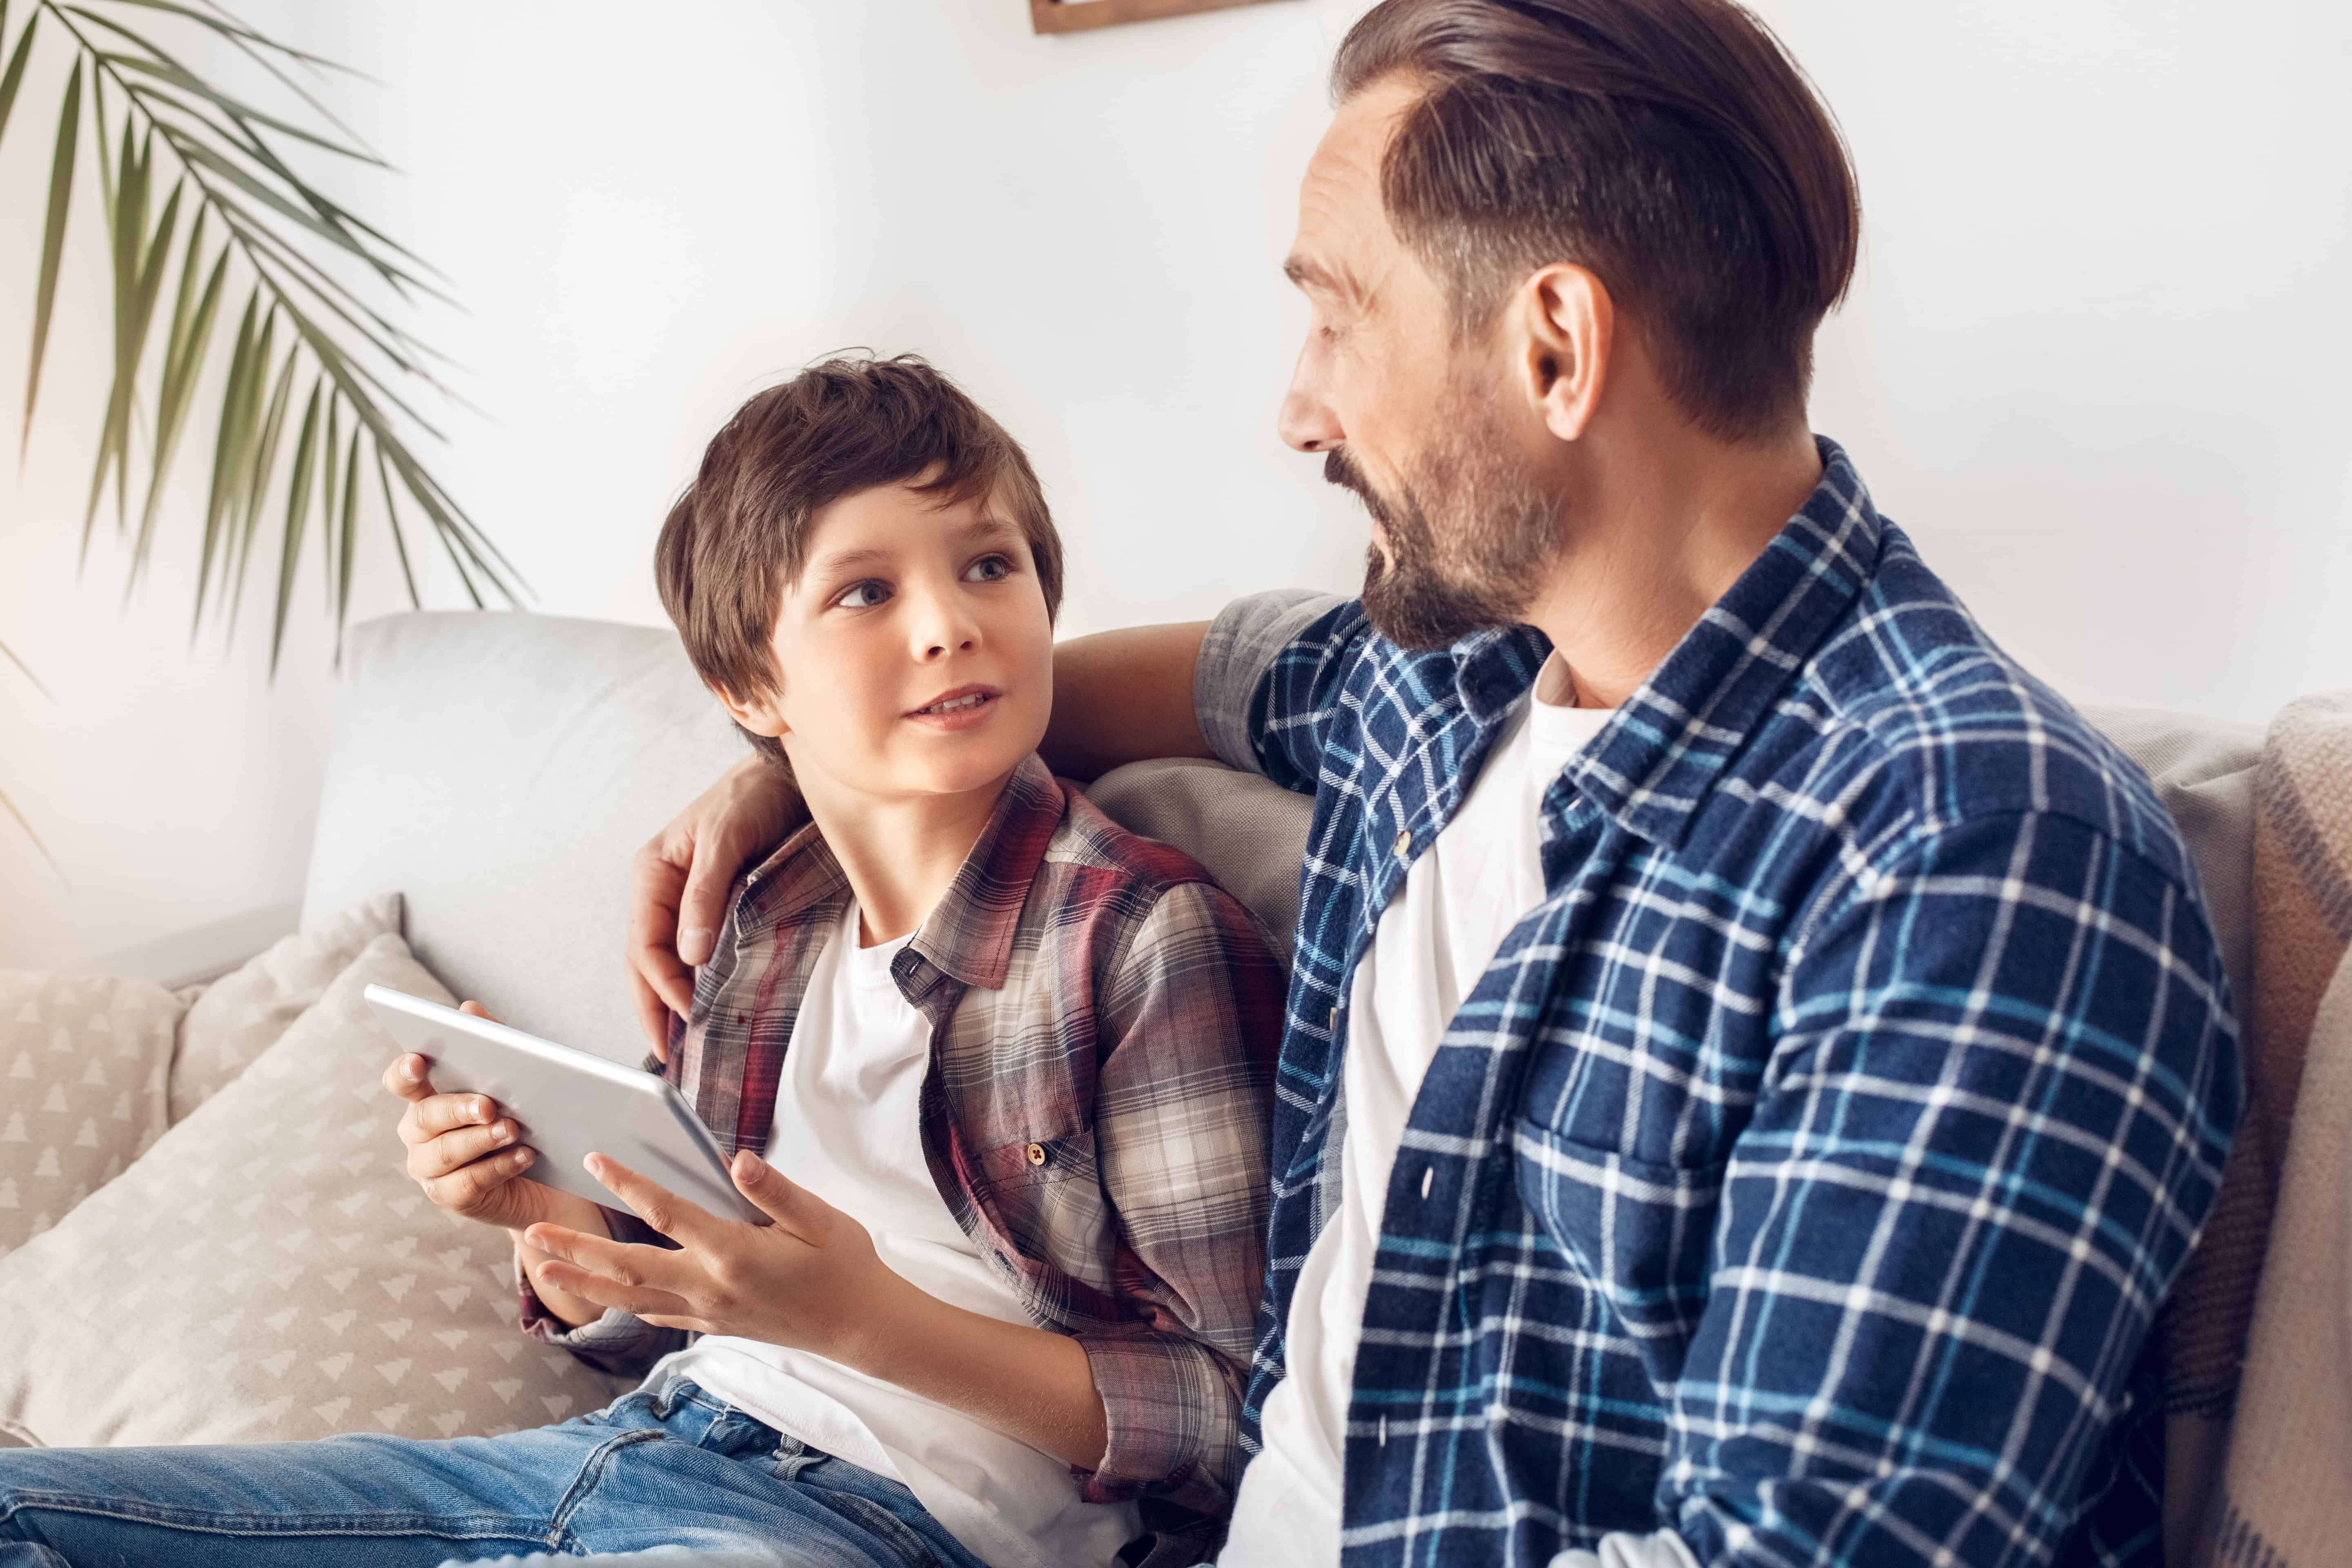 Parent talking with child about online safety